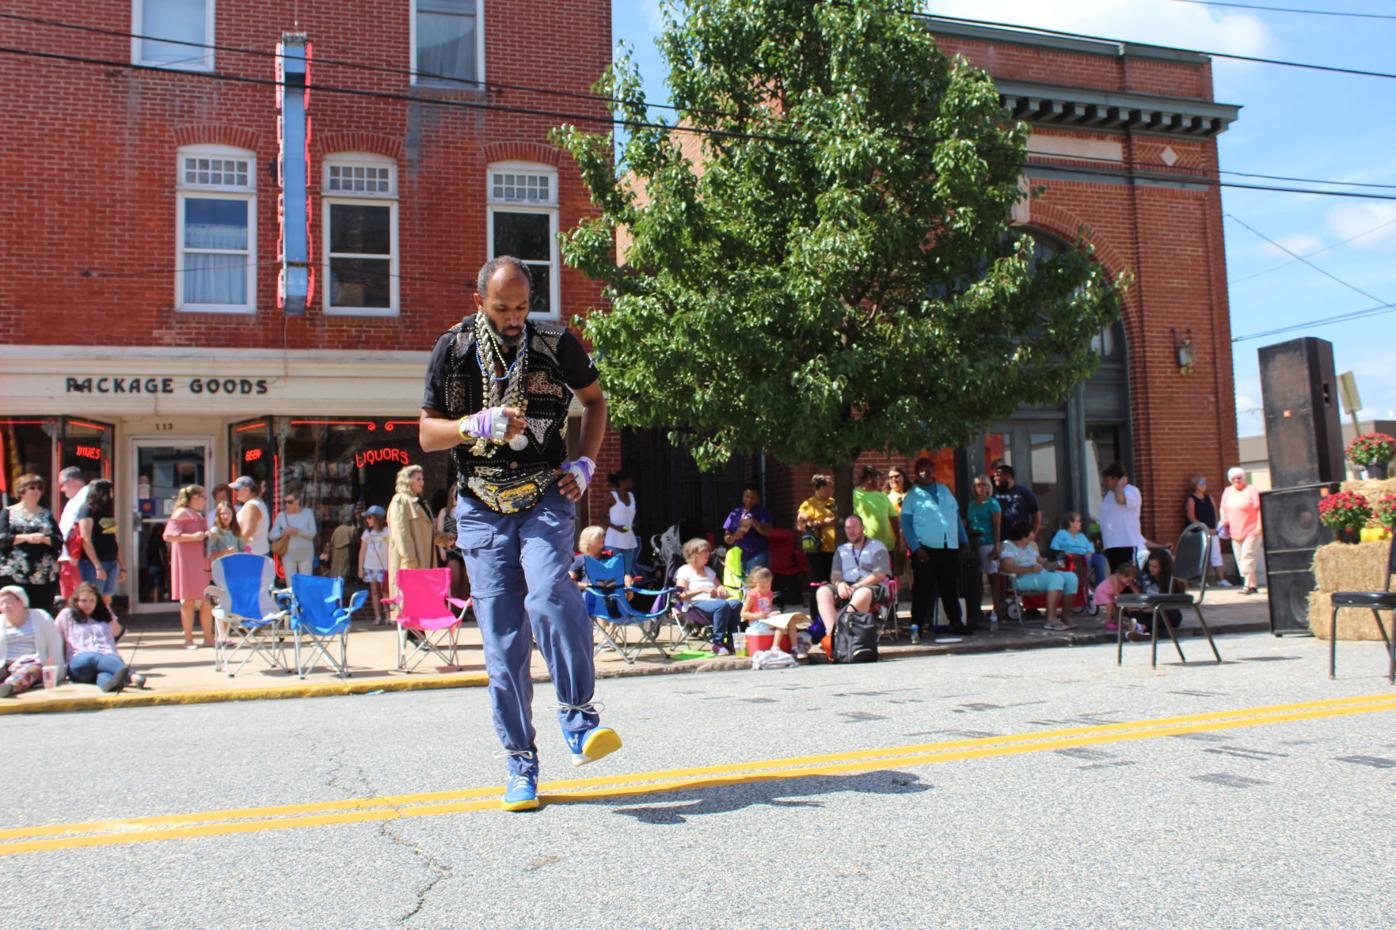 Elkton's Fall Fest large crowds Local News